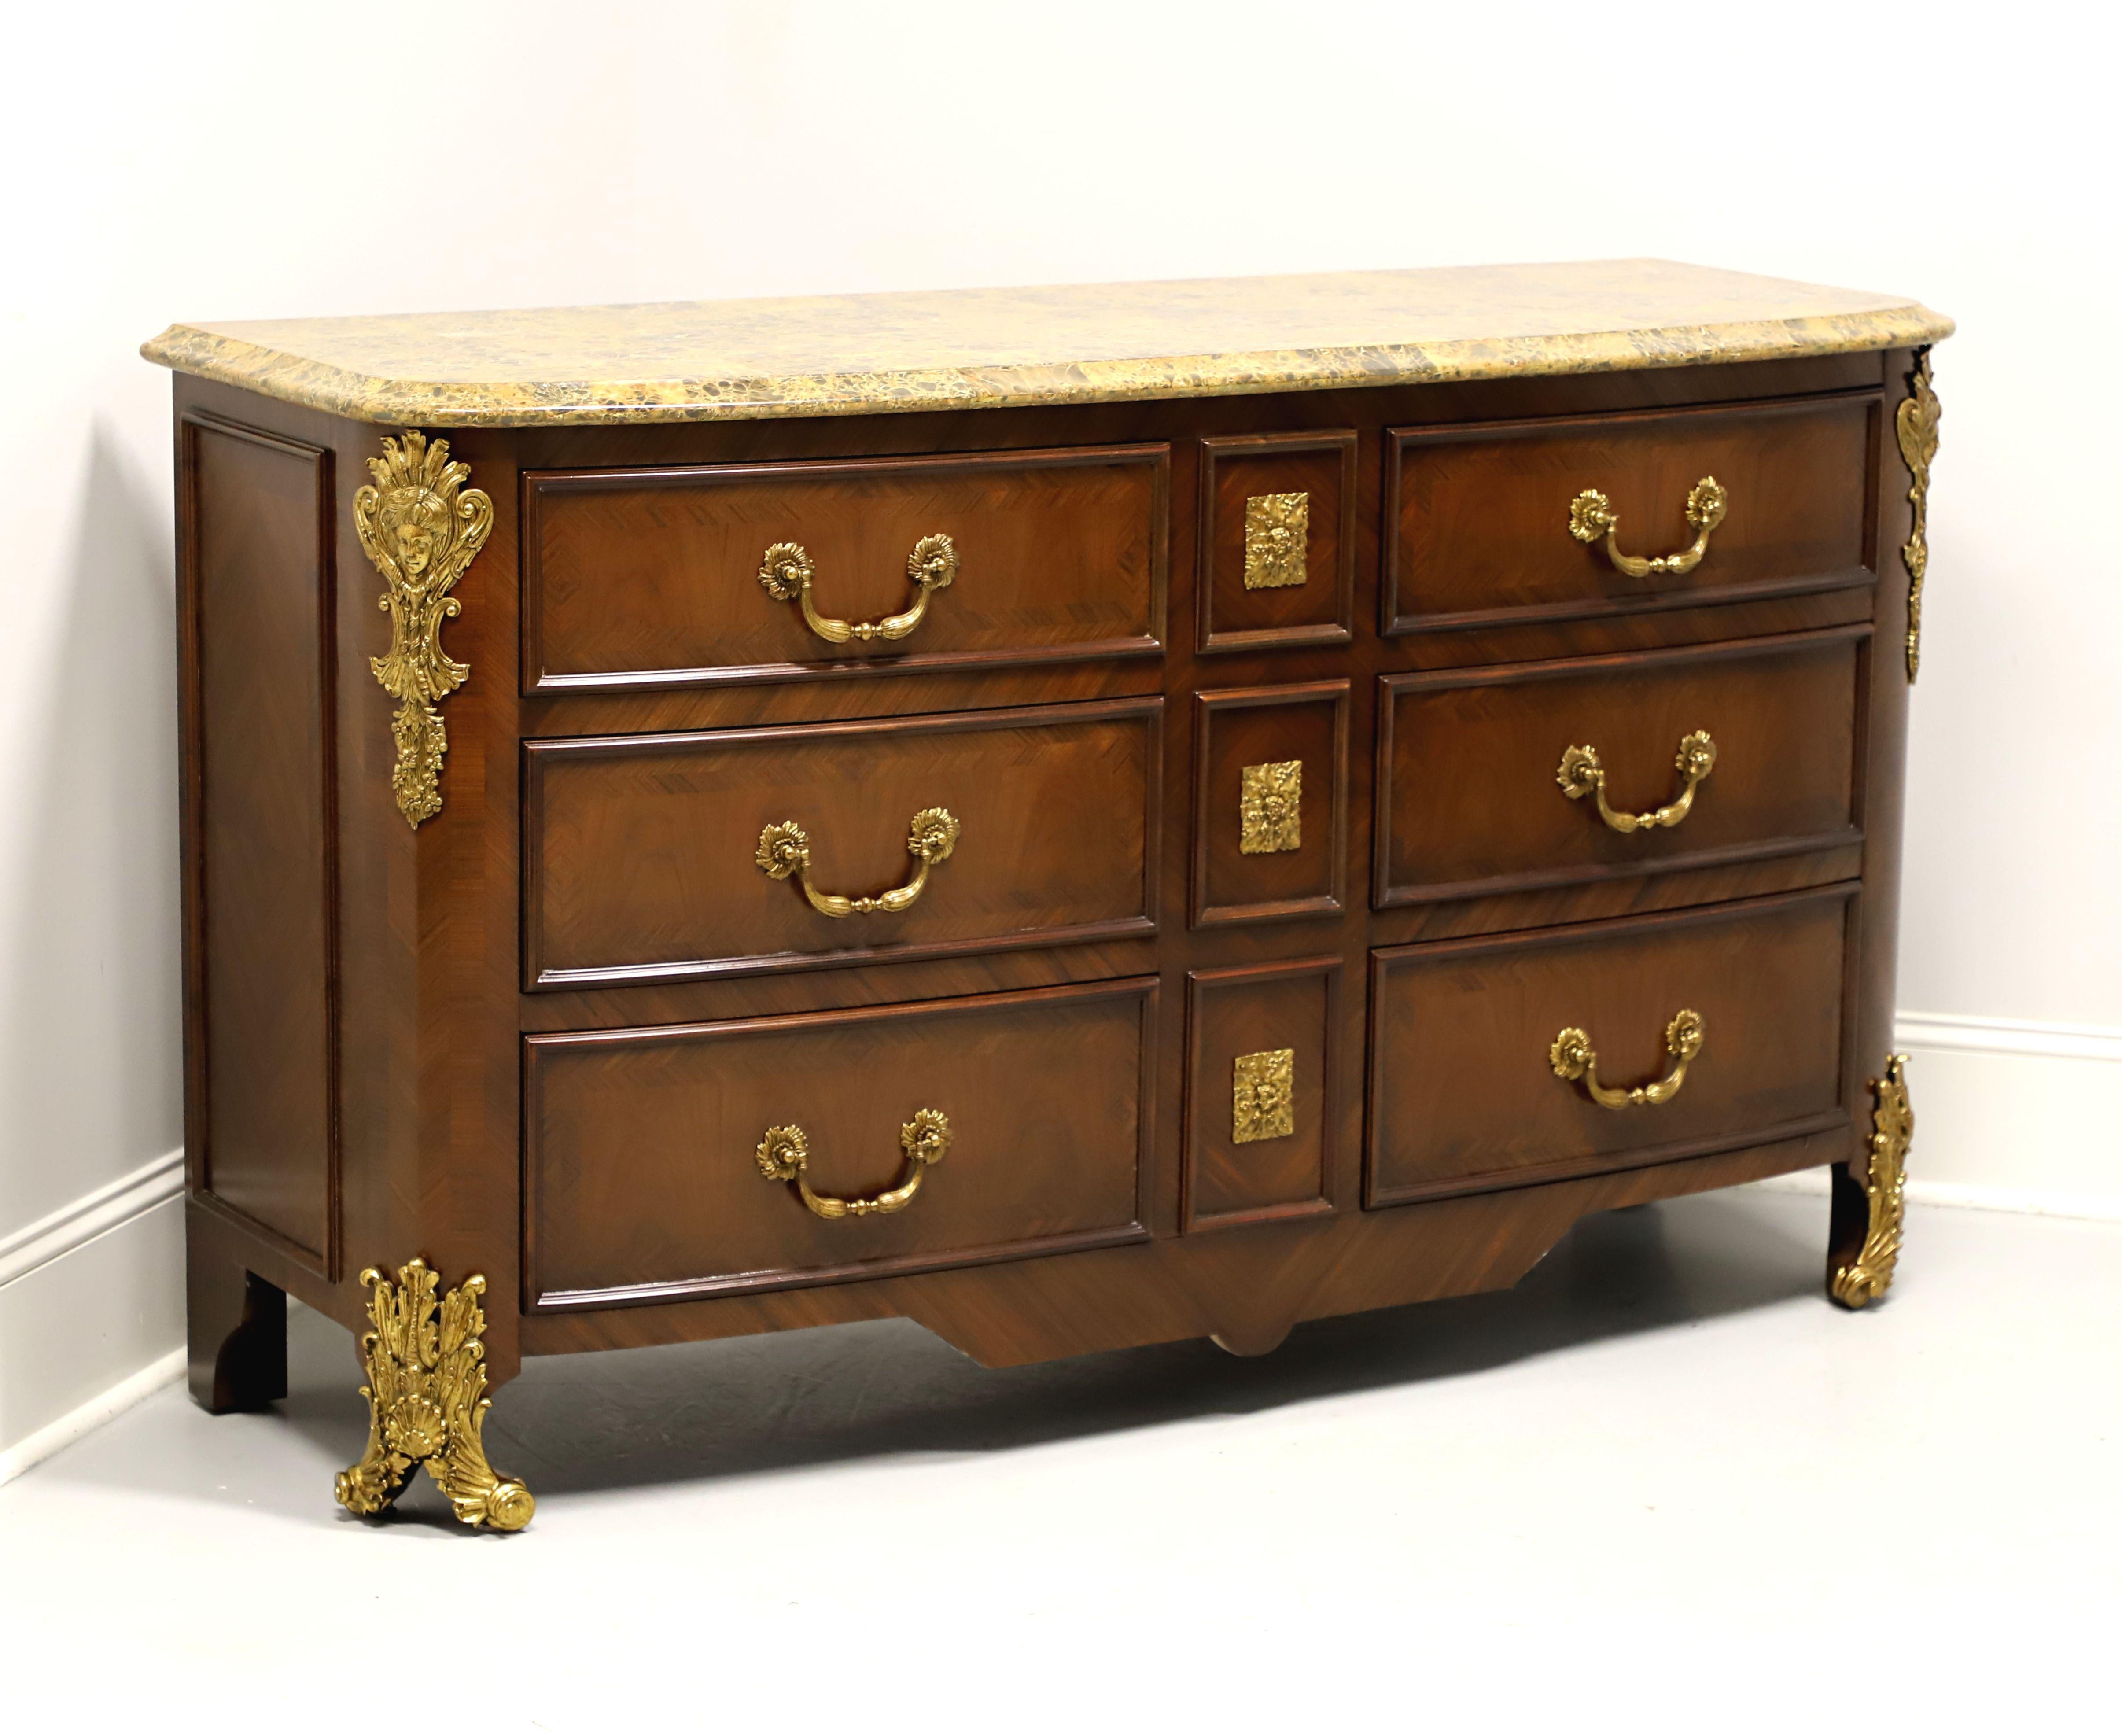 A French Regency style occasional chest by Maitland Smith. Walnut with inlaid parquetry design, fixed cultured marble top with ogee edge, brass hardware, decorative brass ormolu ornamentation to center, corners and front feet. Features six same size